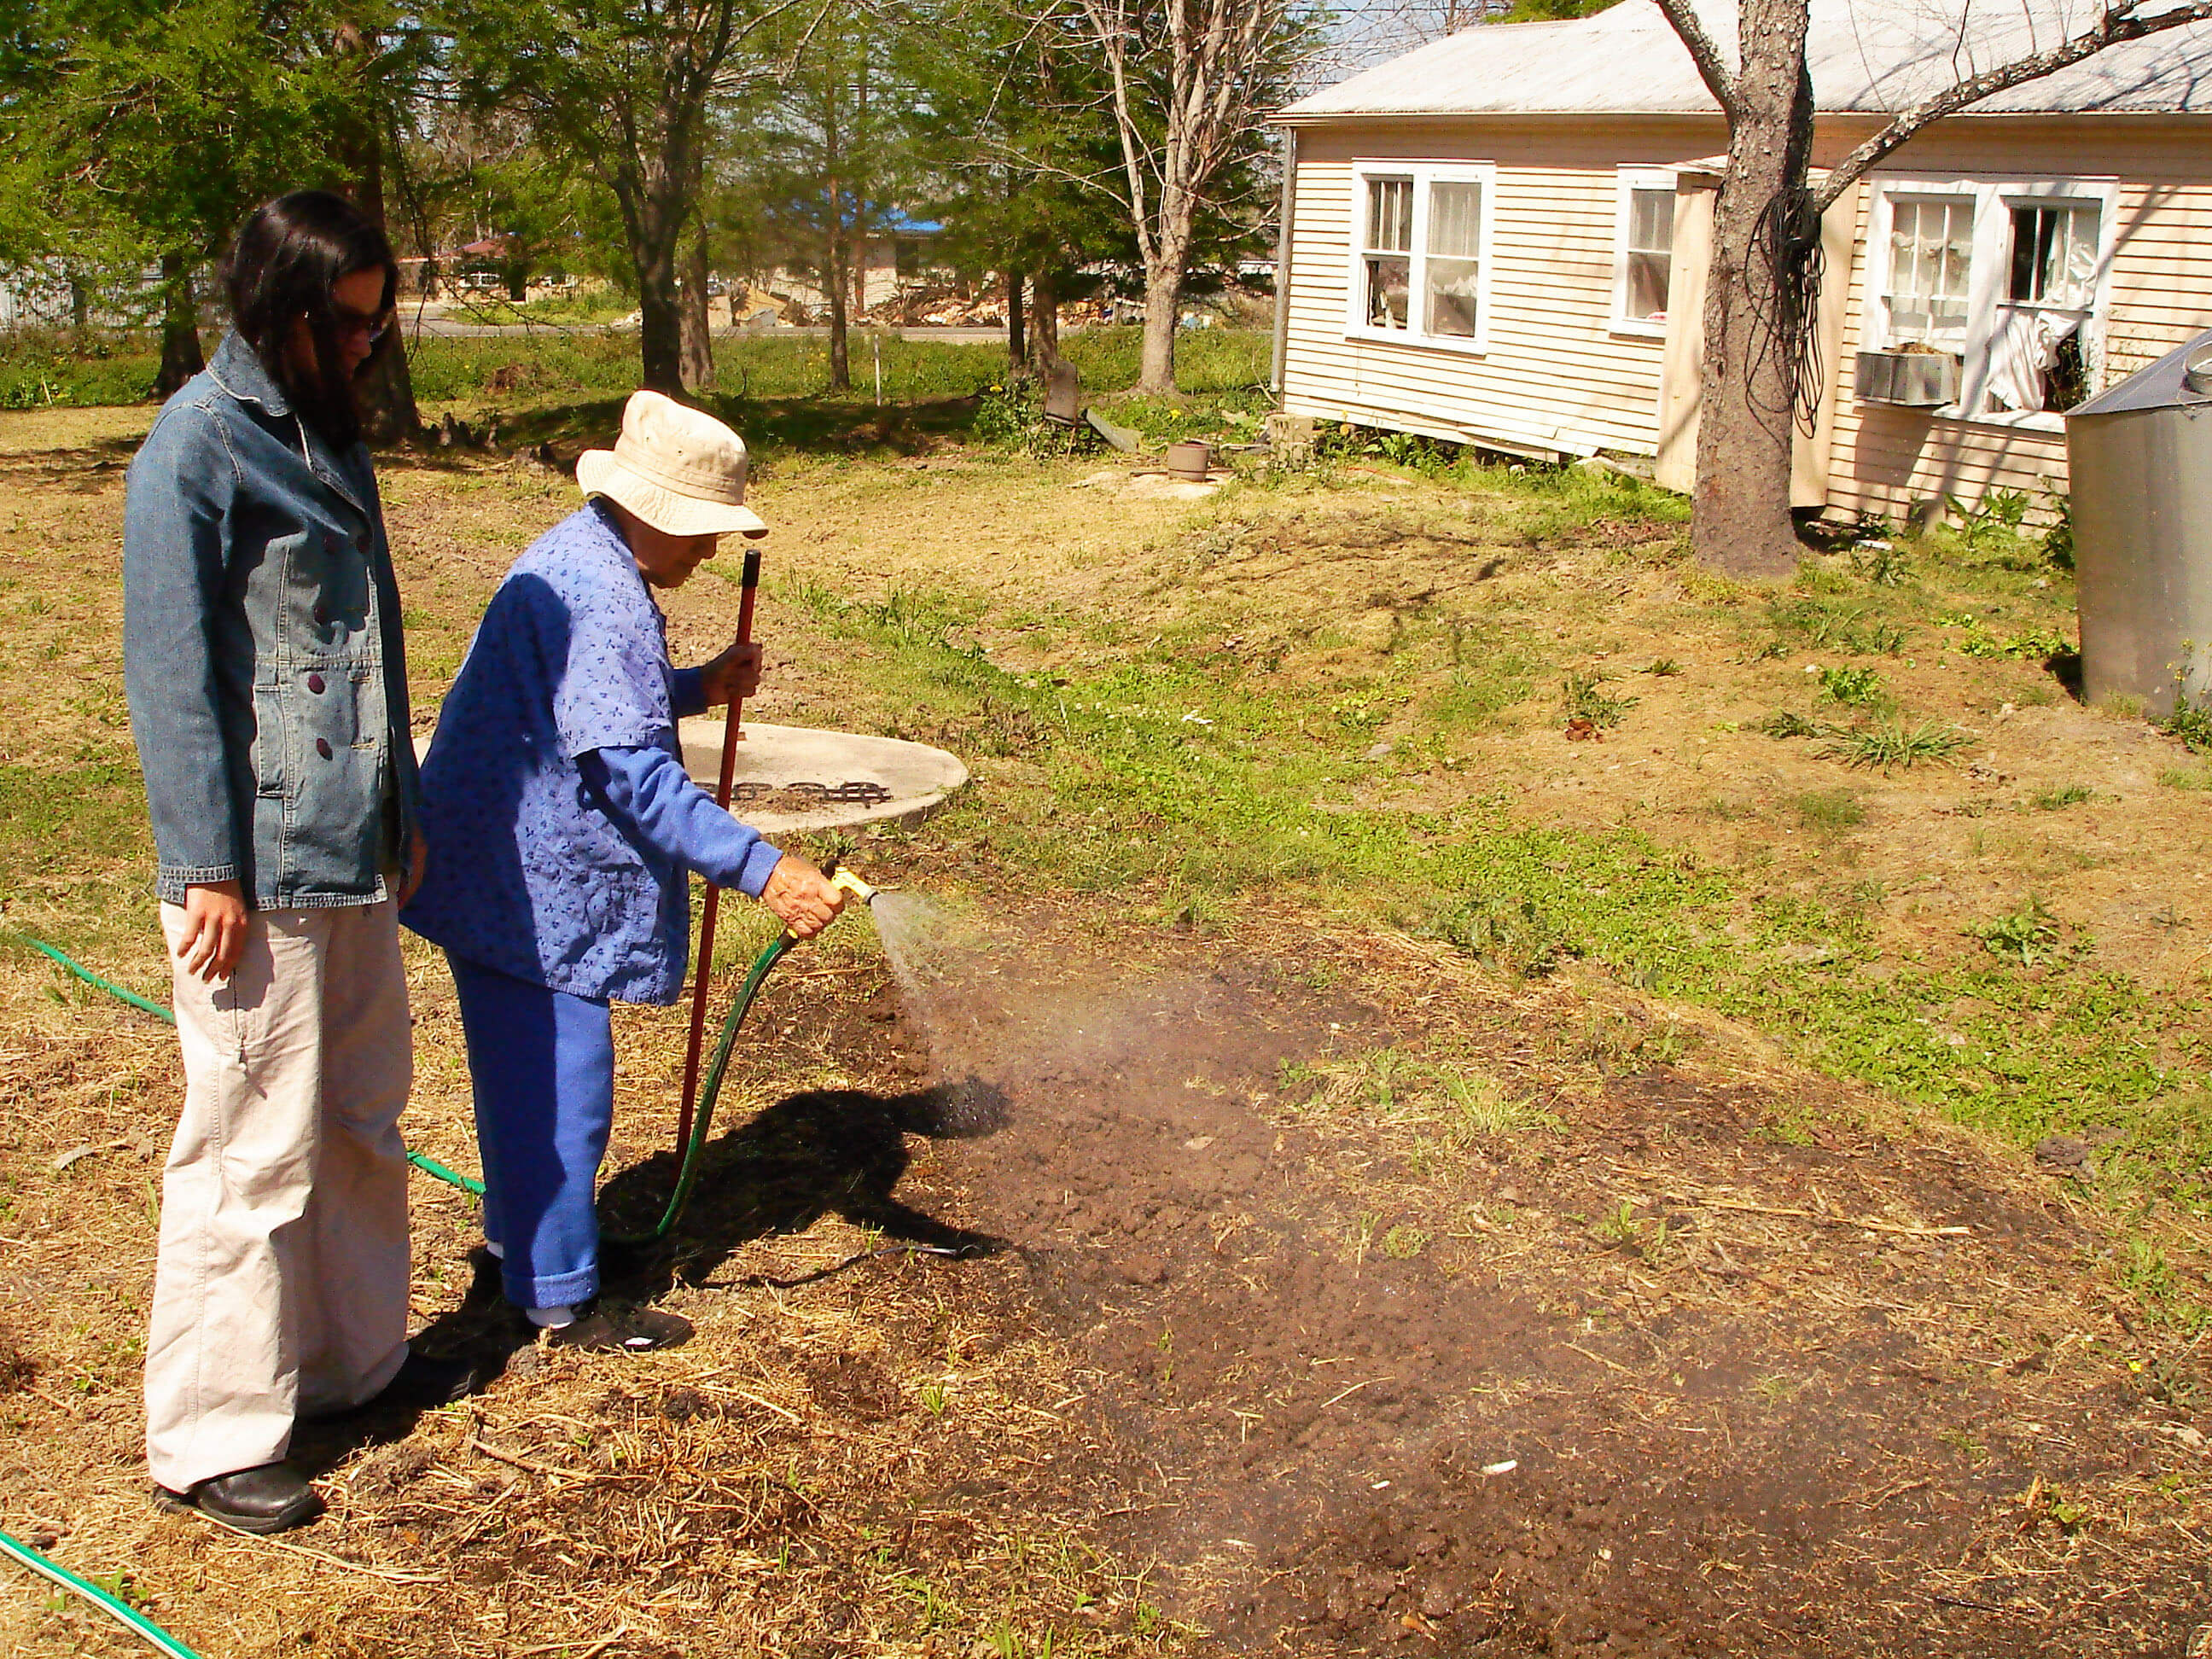 Still from My Louisiana Love. A young woman stands beside an older woman that wears a hat, watching her water a patch of dirt on a lawn.